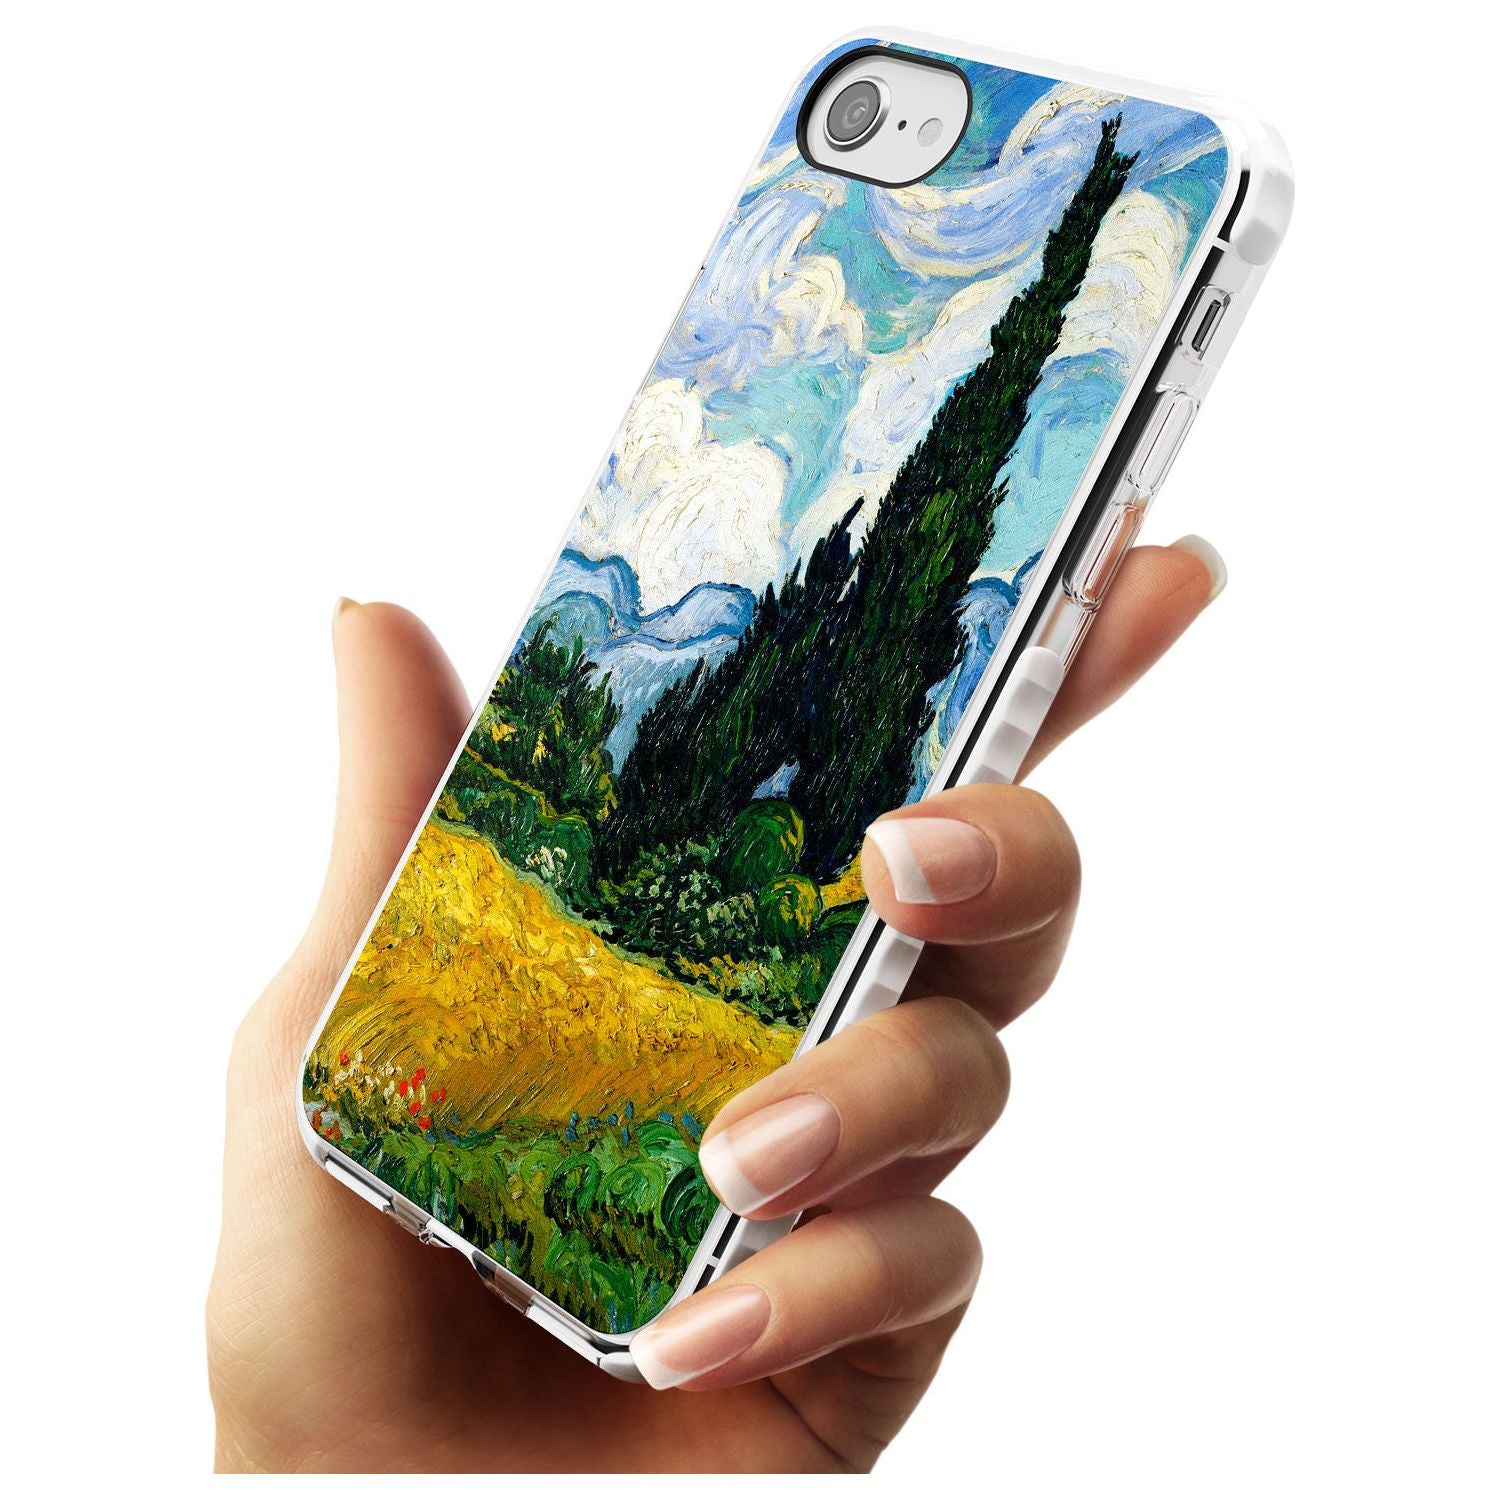 Wheat Field with Cypresses by Vincent Van Gogh Slim TPU Phone Case for iPhone SE 8 7 Plus